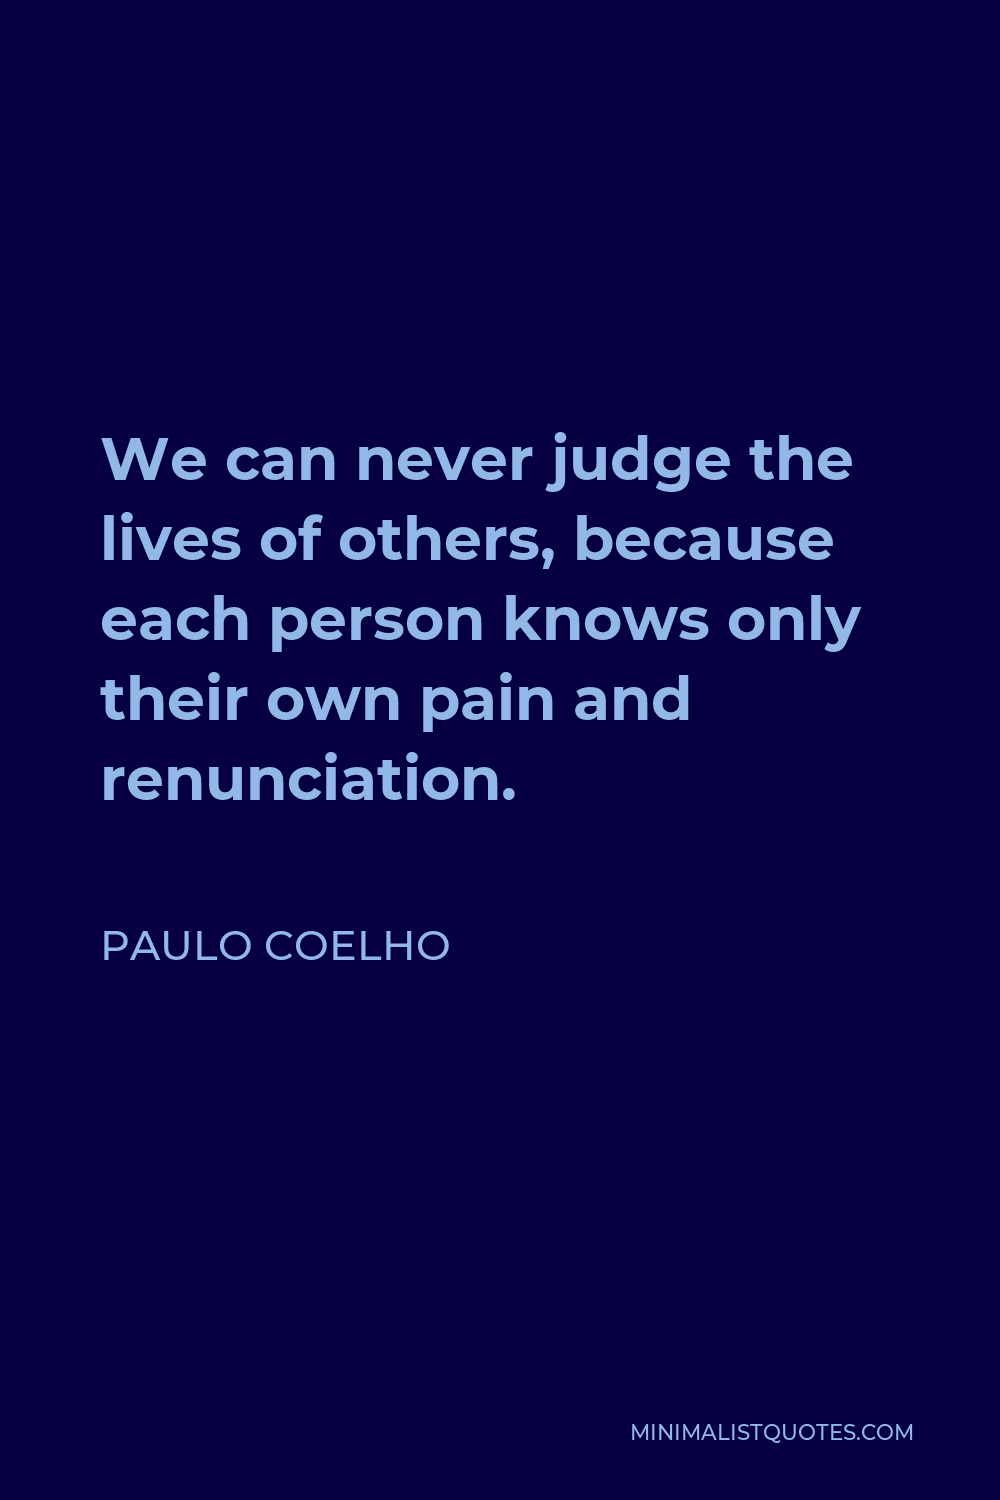 Paulo Coelho Quote - We can never judge the lives of others, because each person knows only their own pain and renunciation.